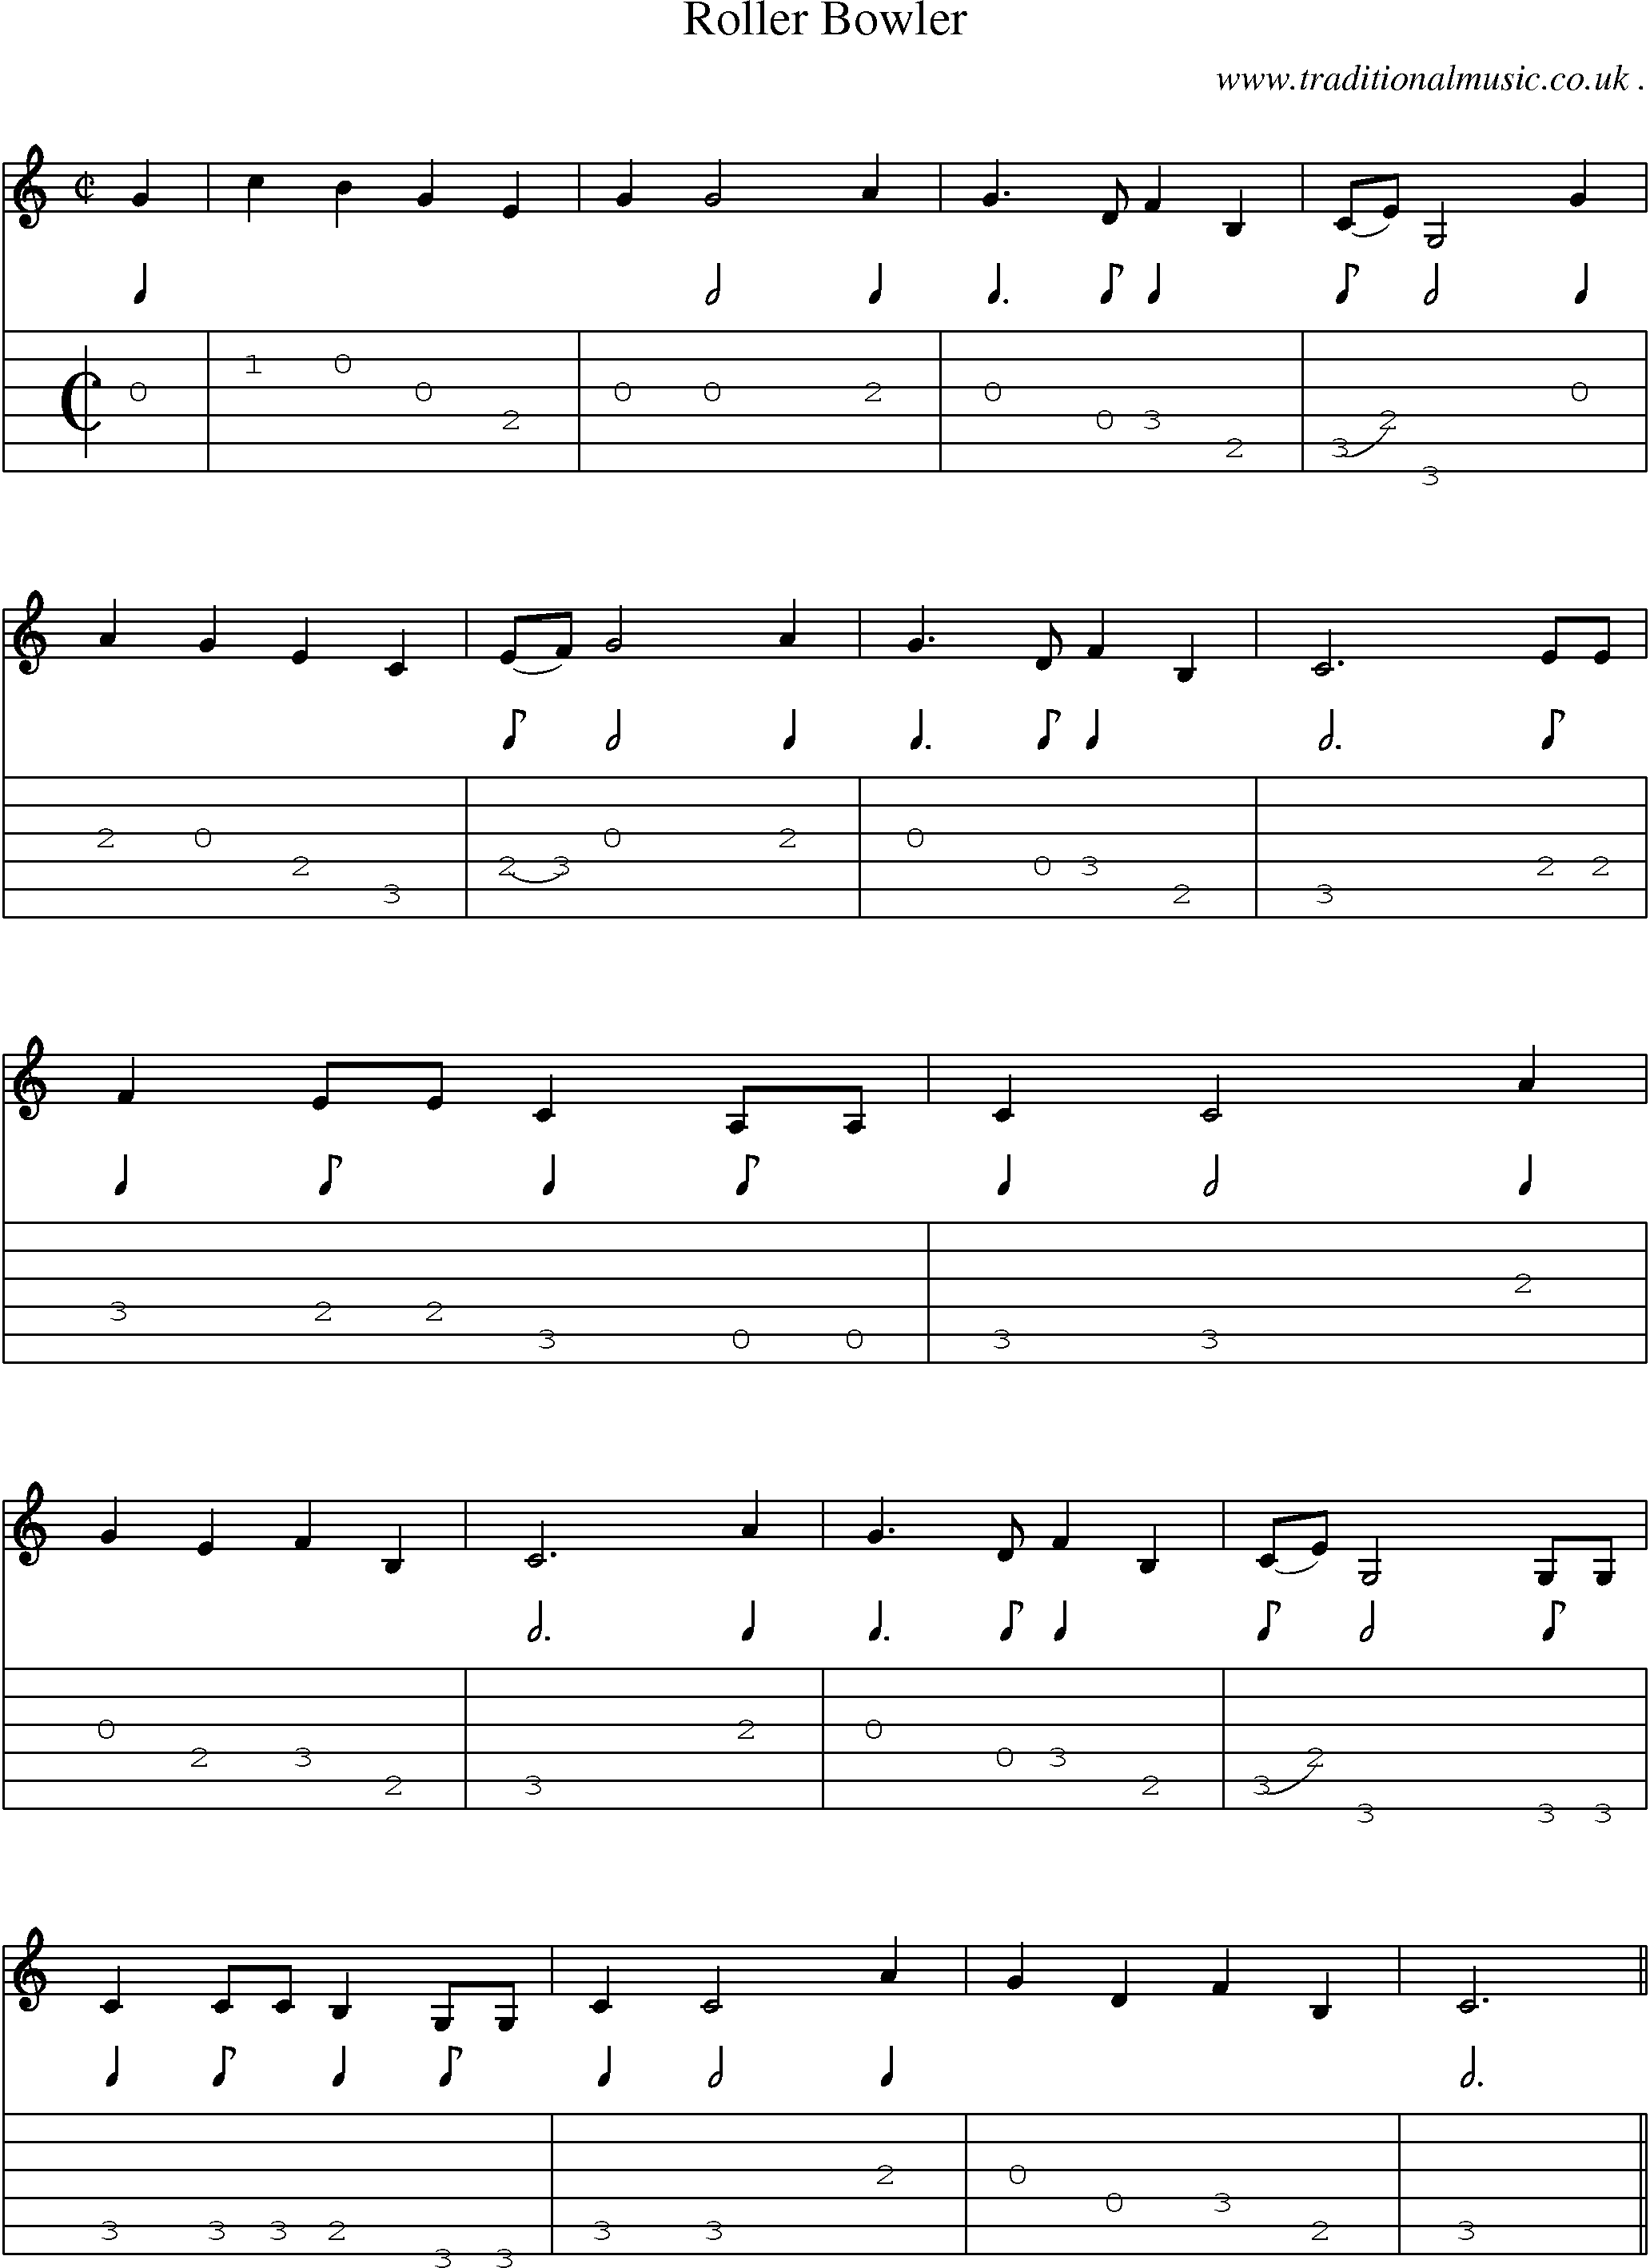 Sheet-Music and Guitar Tabs for Roller Bowler